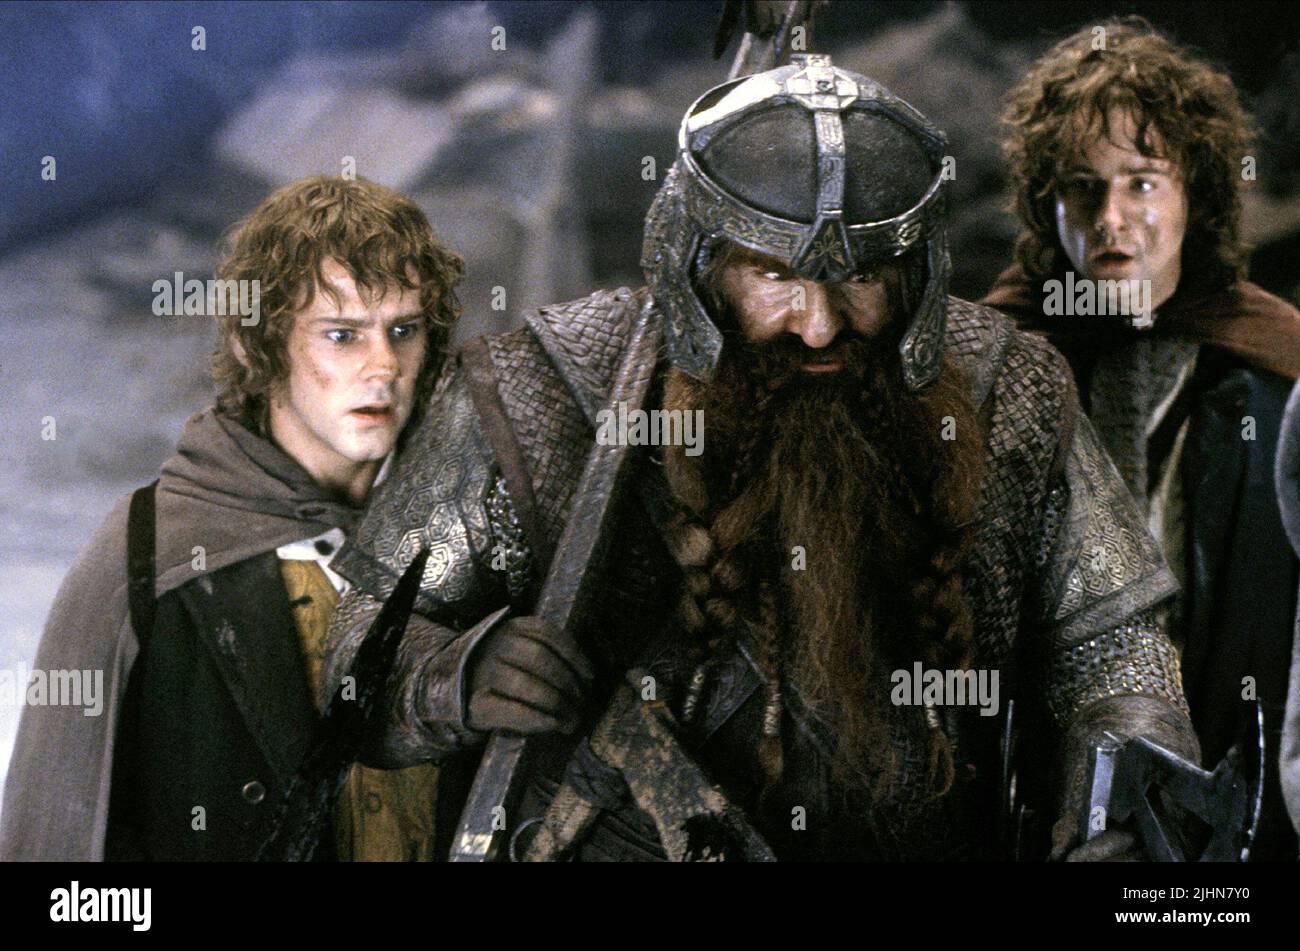 DOMINIC MONAGHAN, JOHN RHYS-DAVIES, BILLY BOYD, THE LORD OF THE RINGS: THE FELLOWSHIP OF THE RING, 2001 Stock Photo